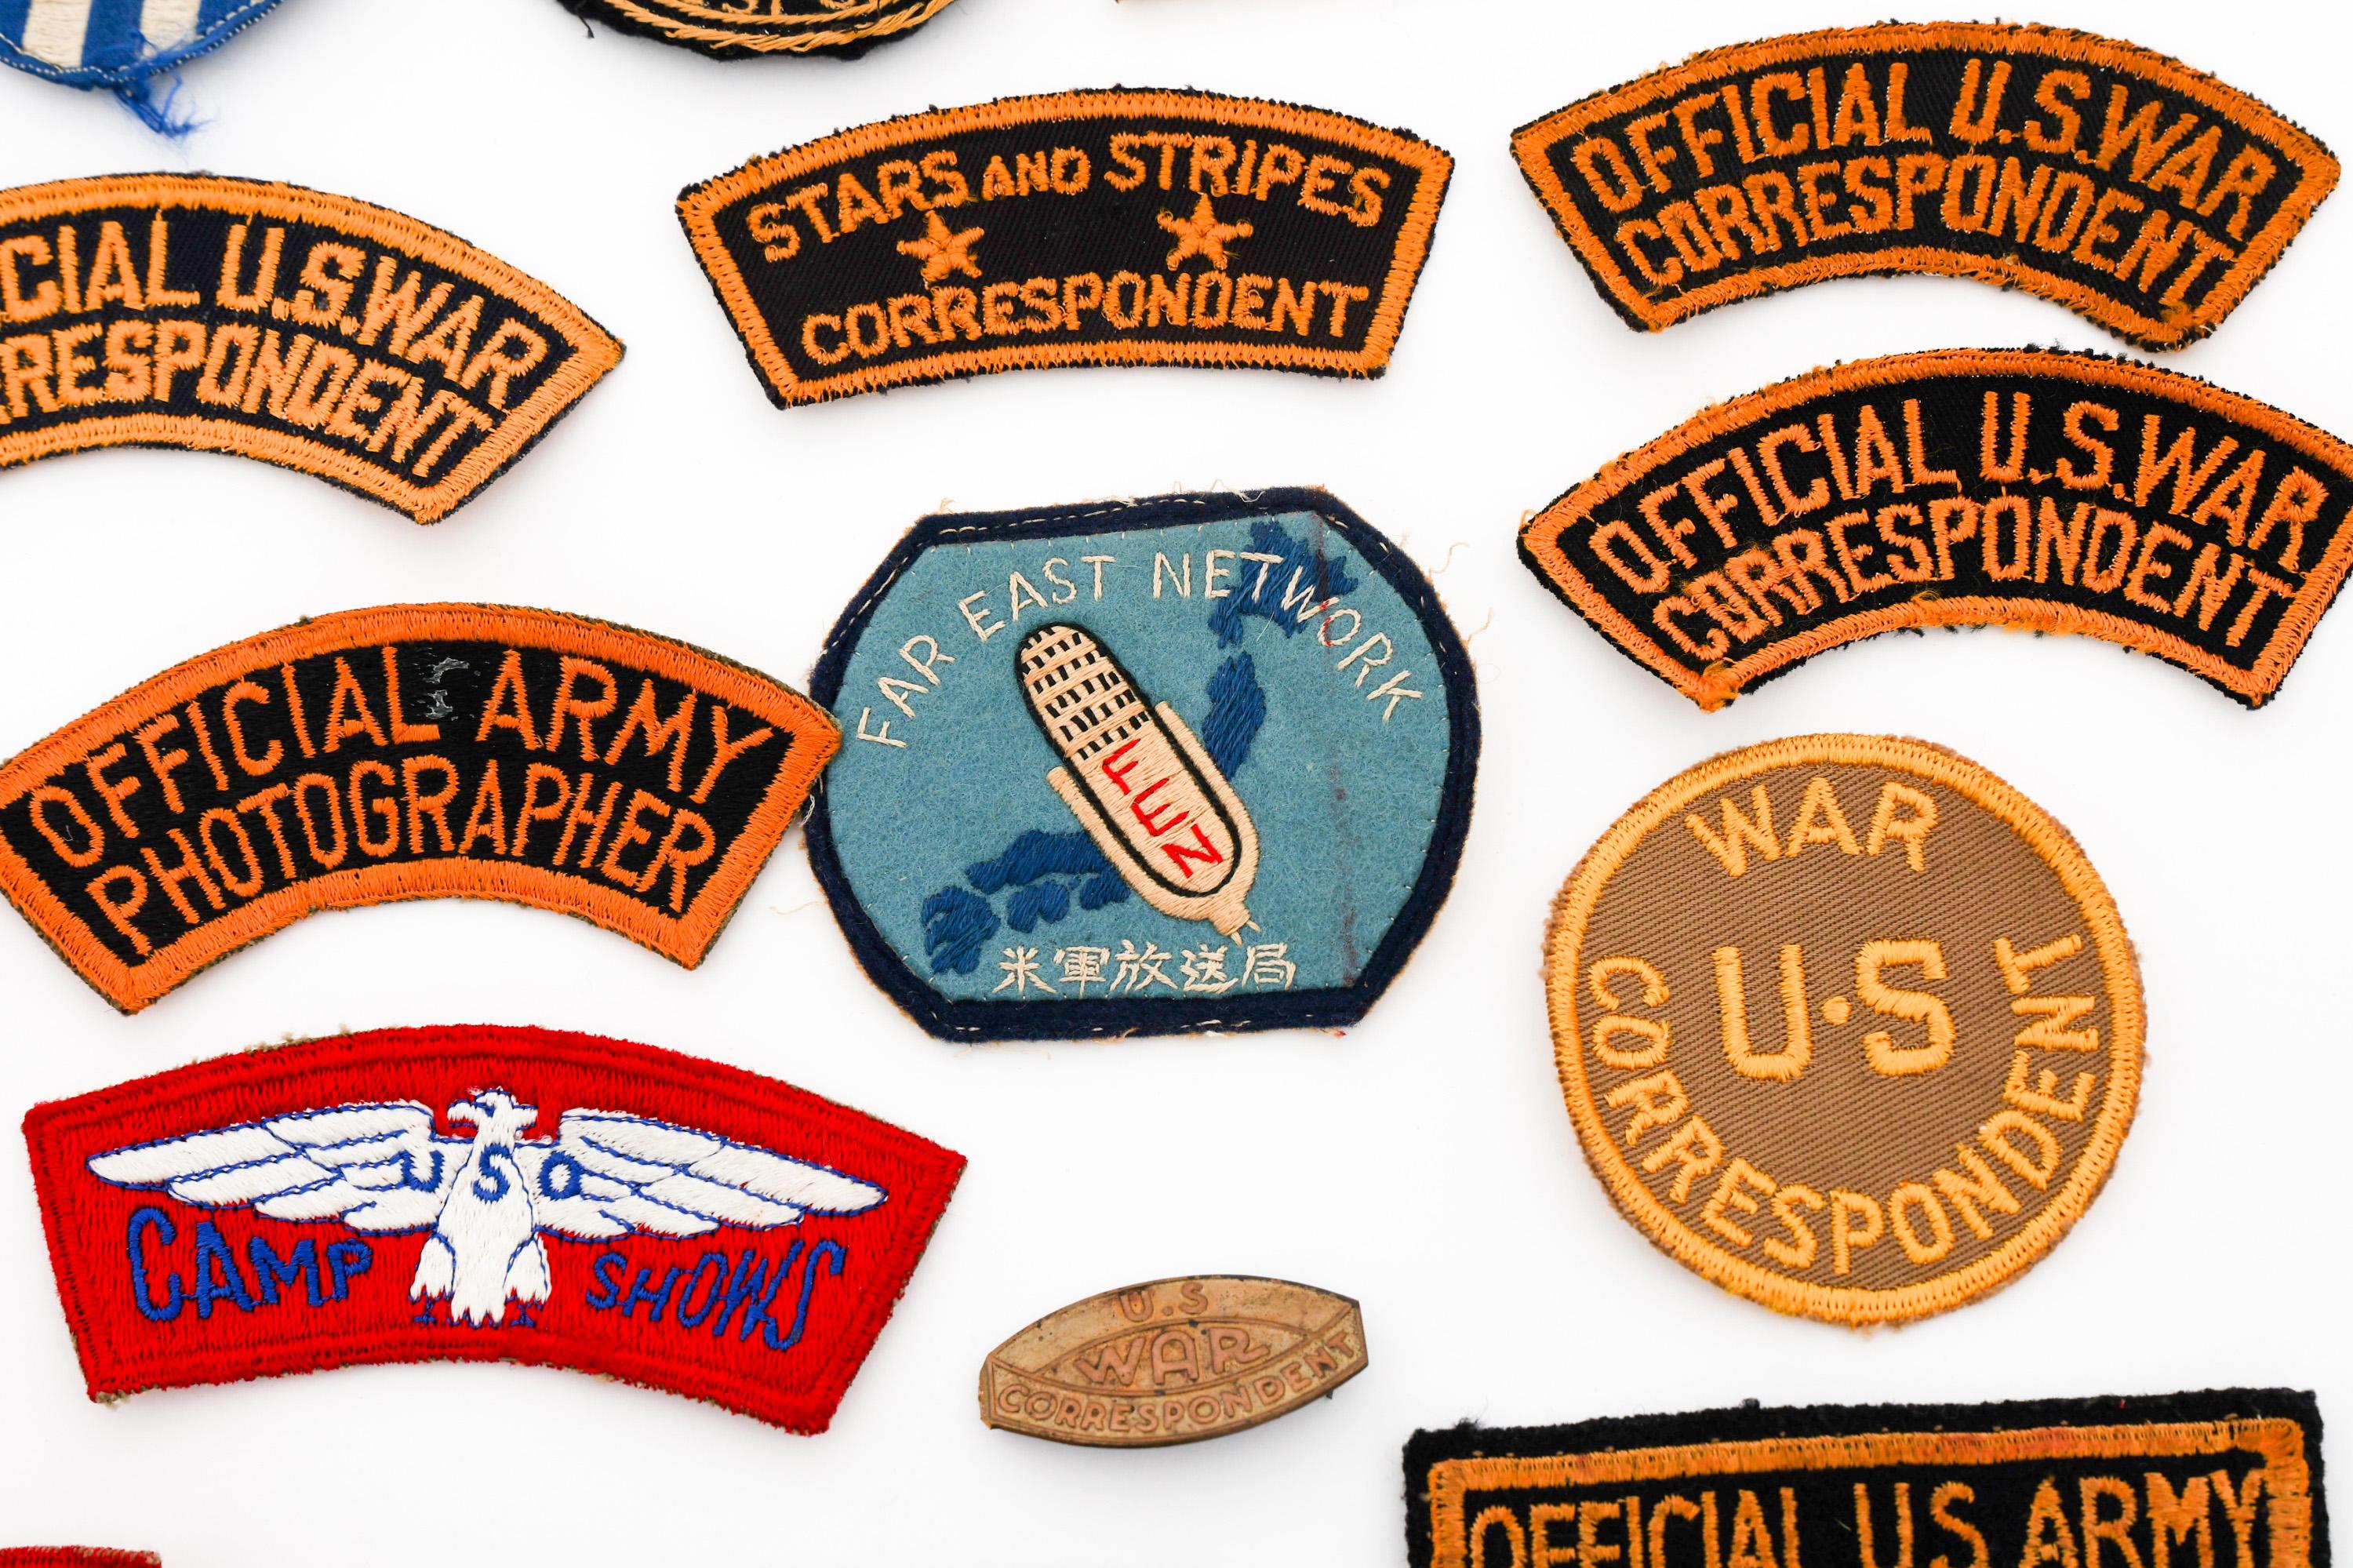 WWII US PHOTOGRAPHER & CORRESPONDENT PATCHES